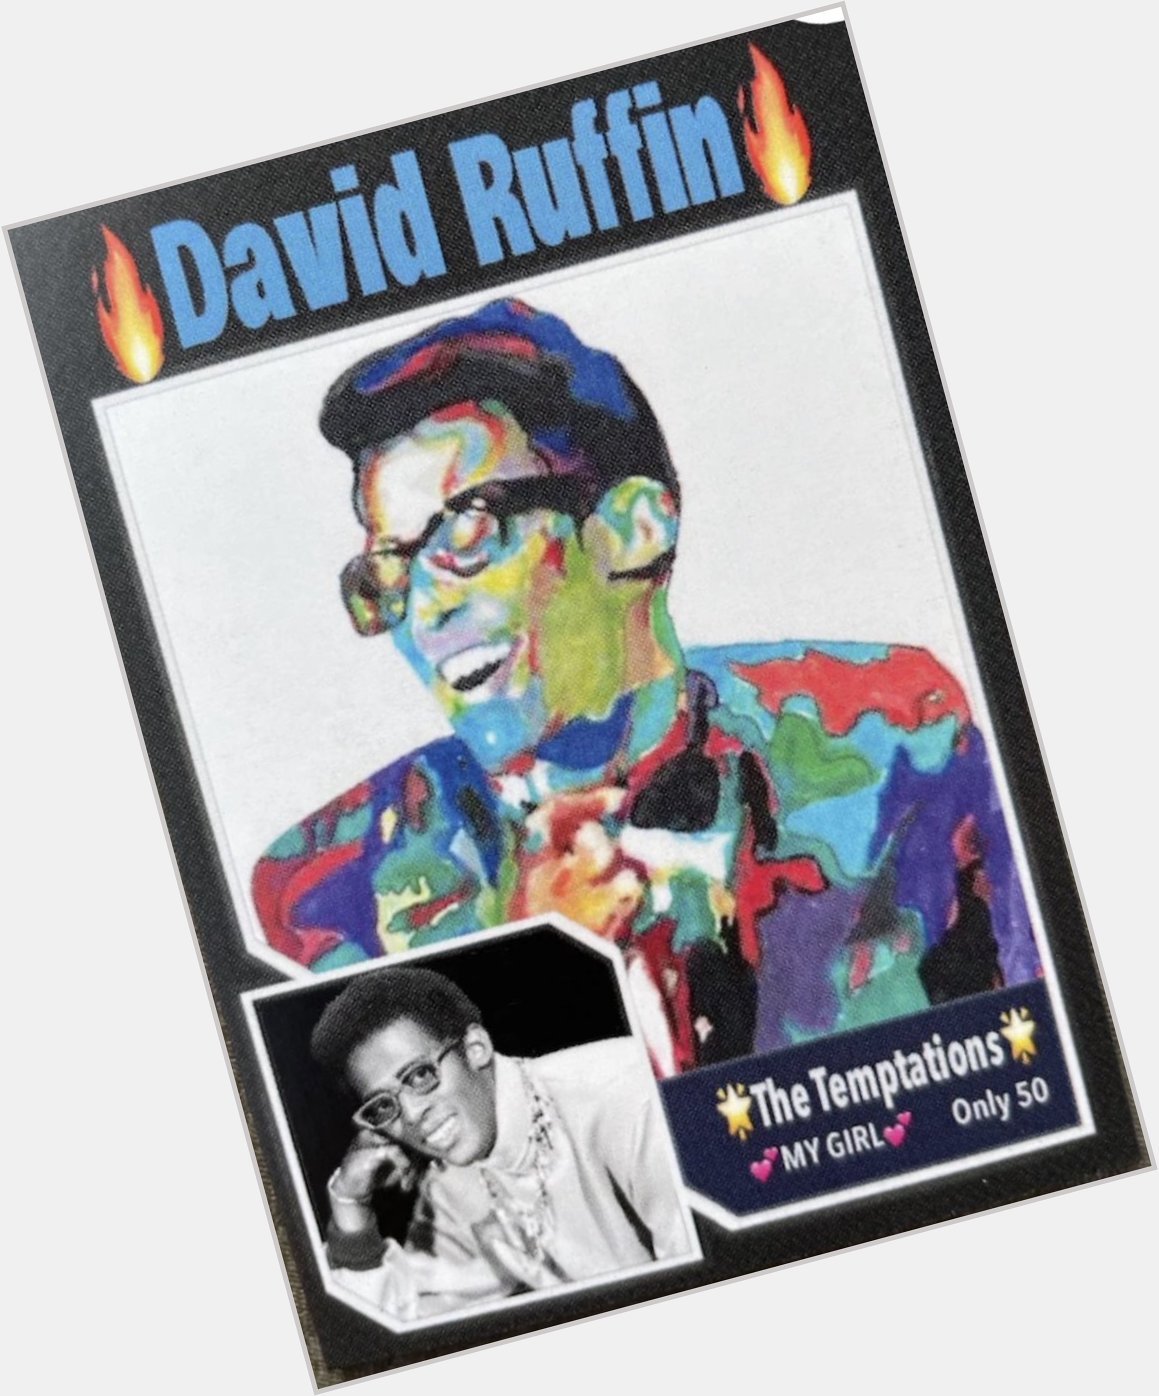 Happy Birthday David Ruffin the greatest singer in the world to me  